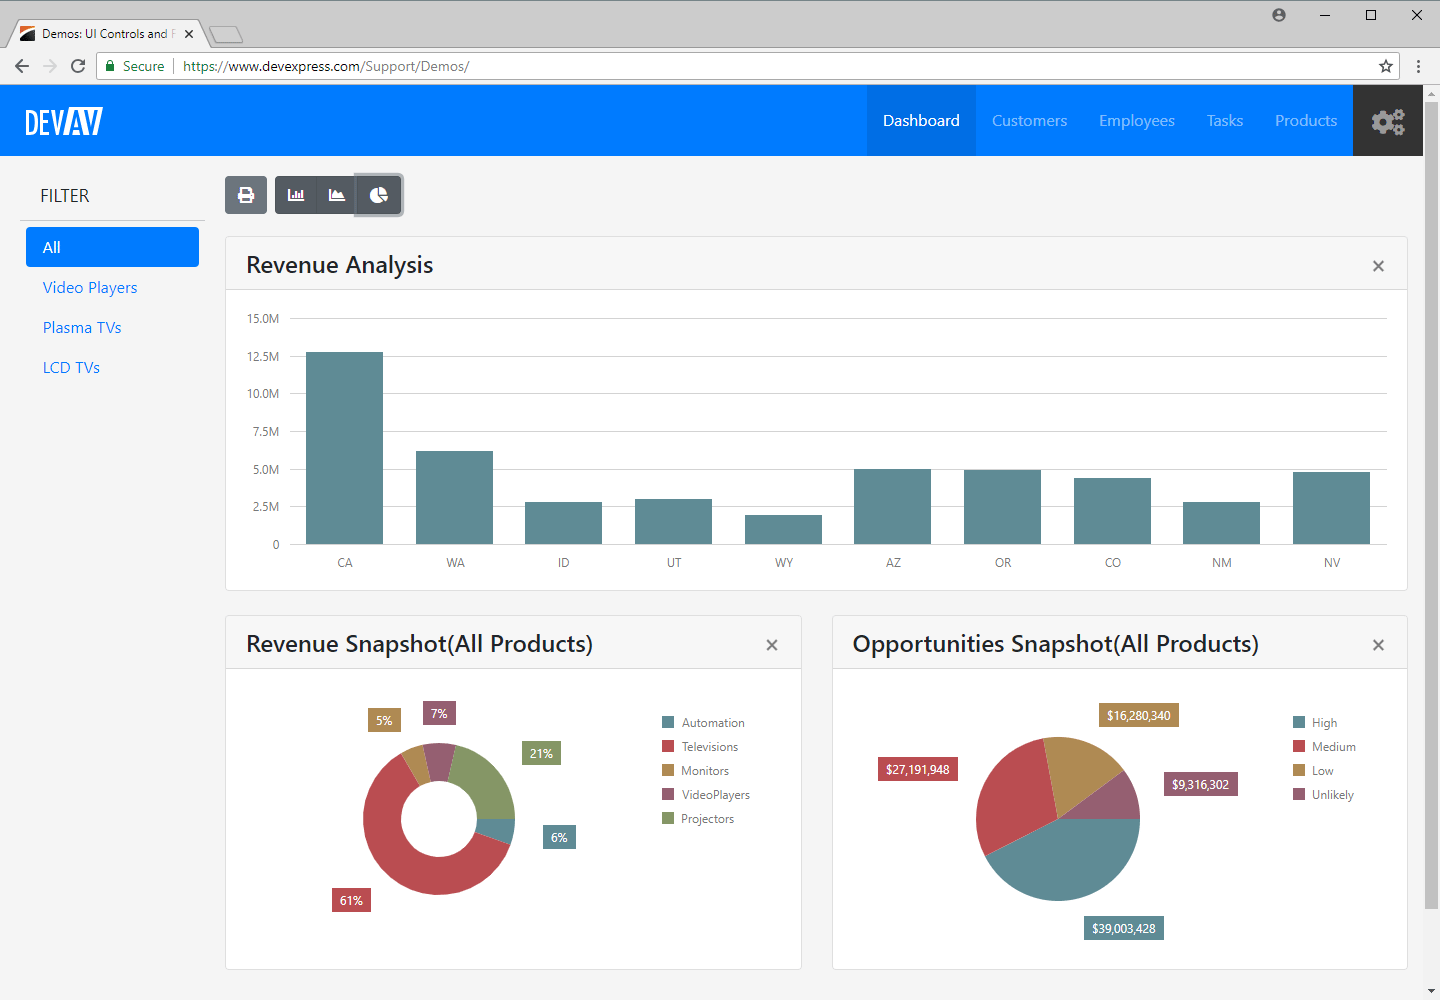  ASP.NET Bootstrap Web Forms App - Dashboard View with Chart Controls